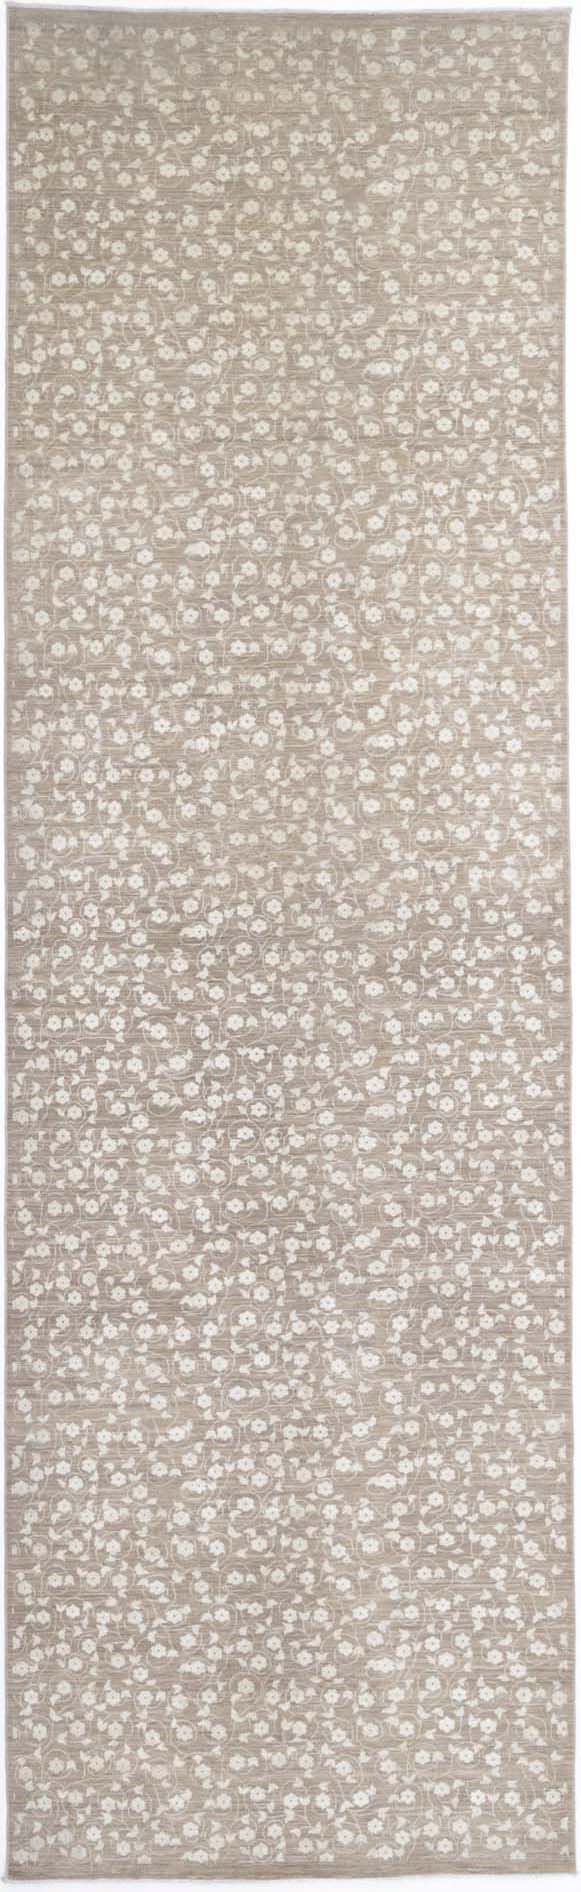 Hand Knotted Fine Artemix Wool Rug - 4'11'' x 17'7''